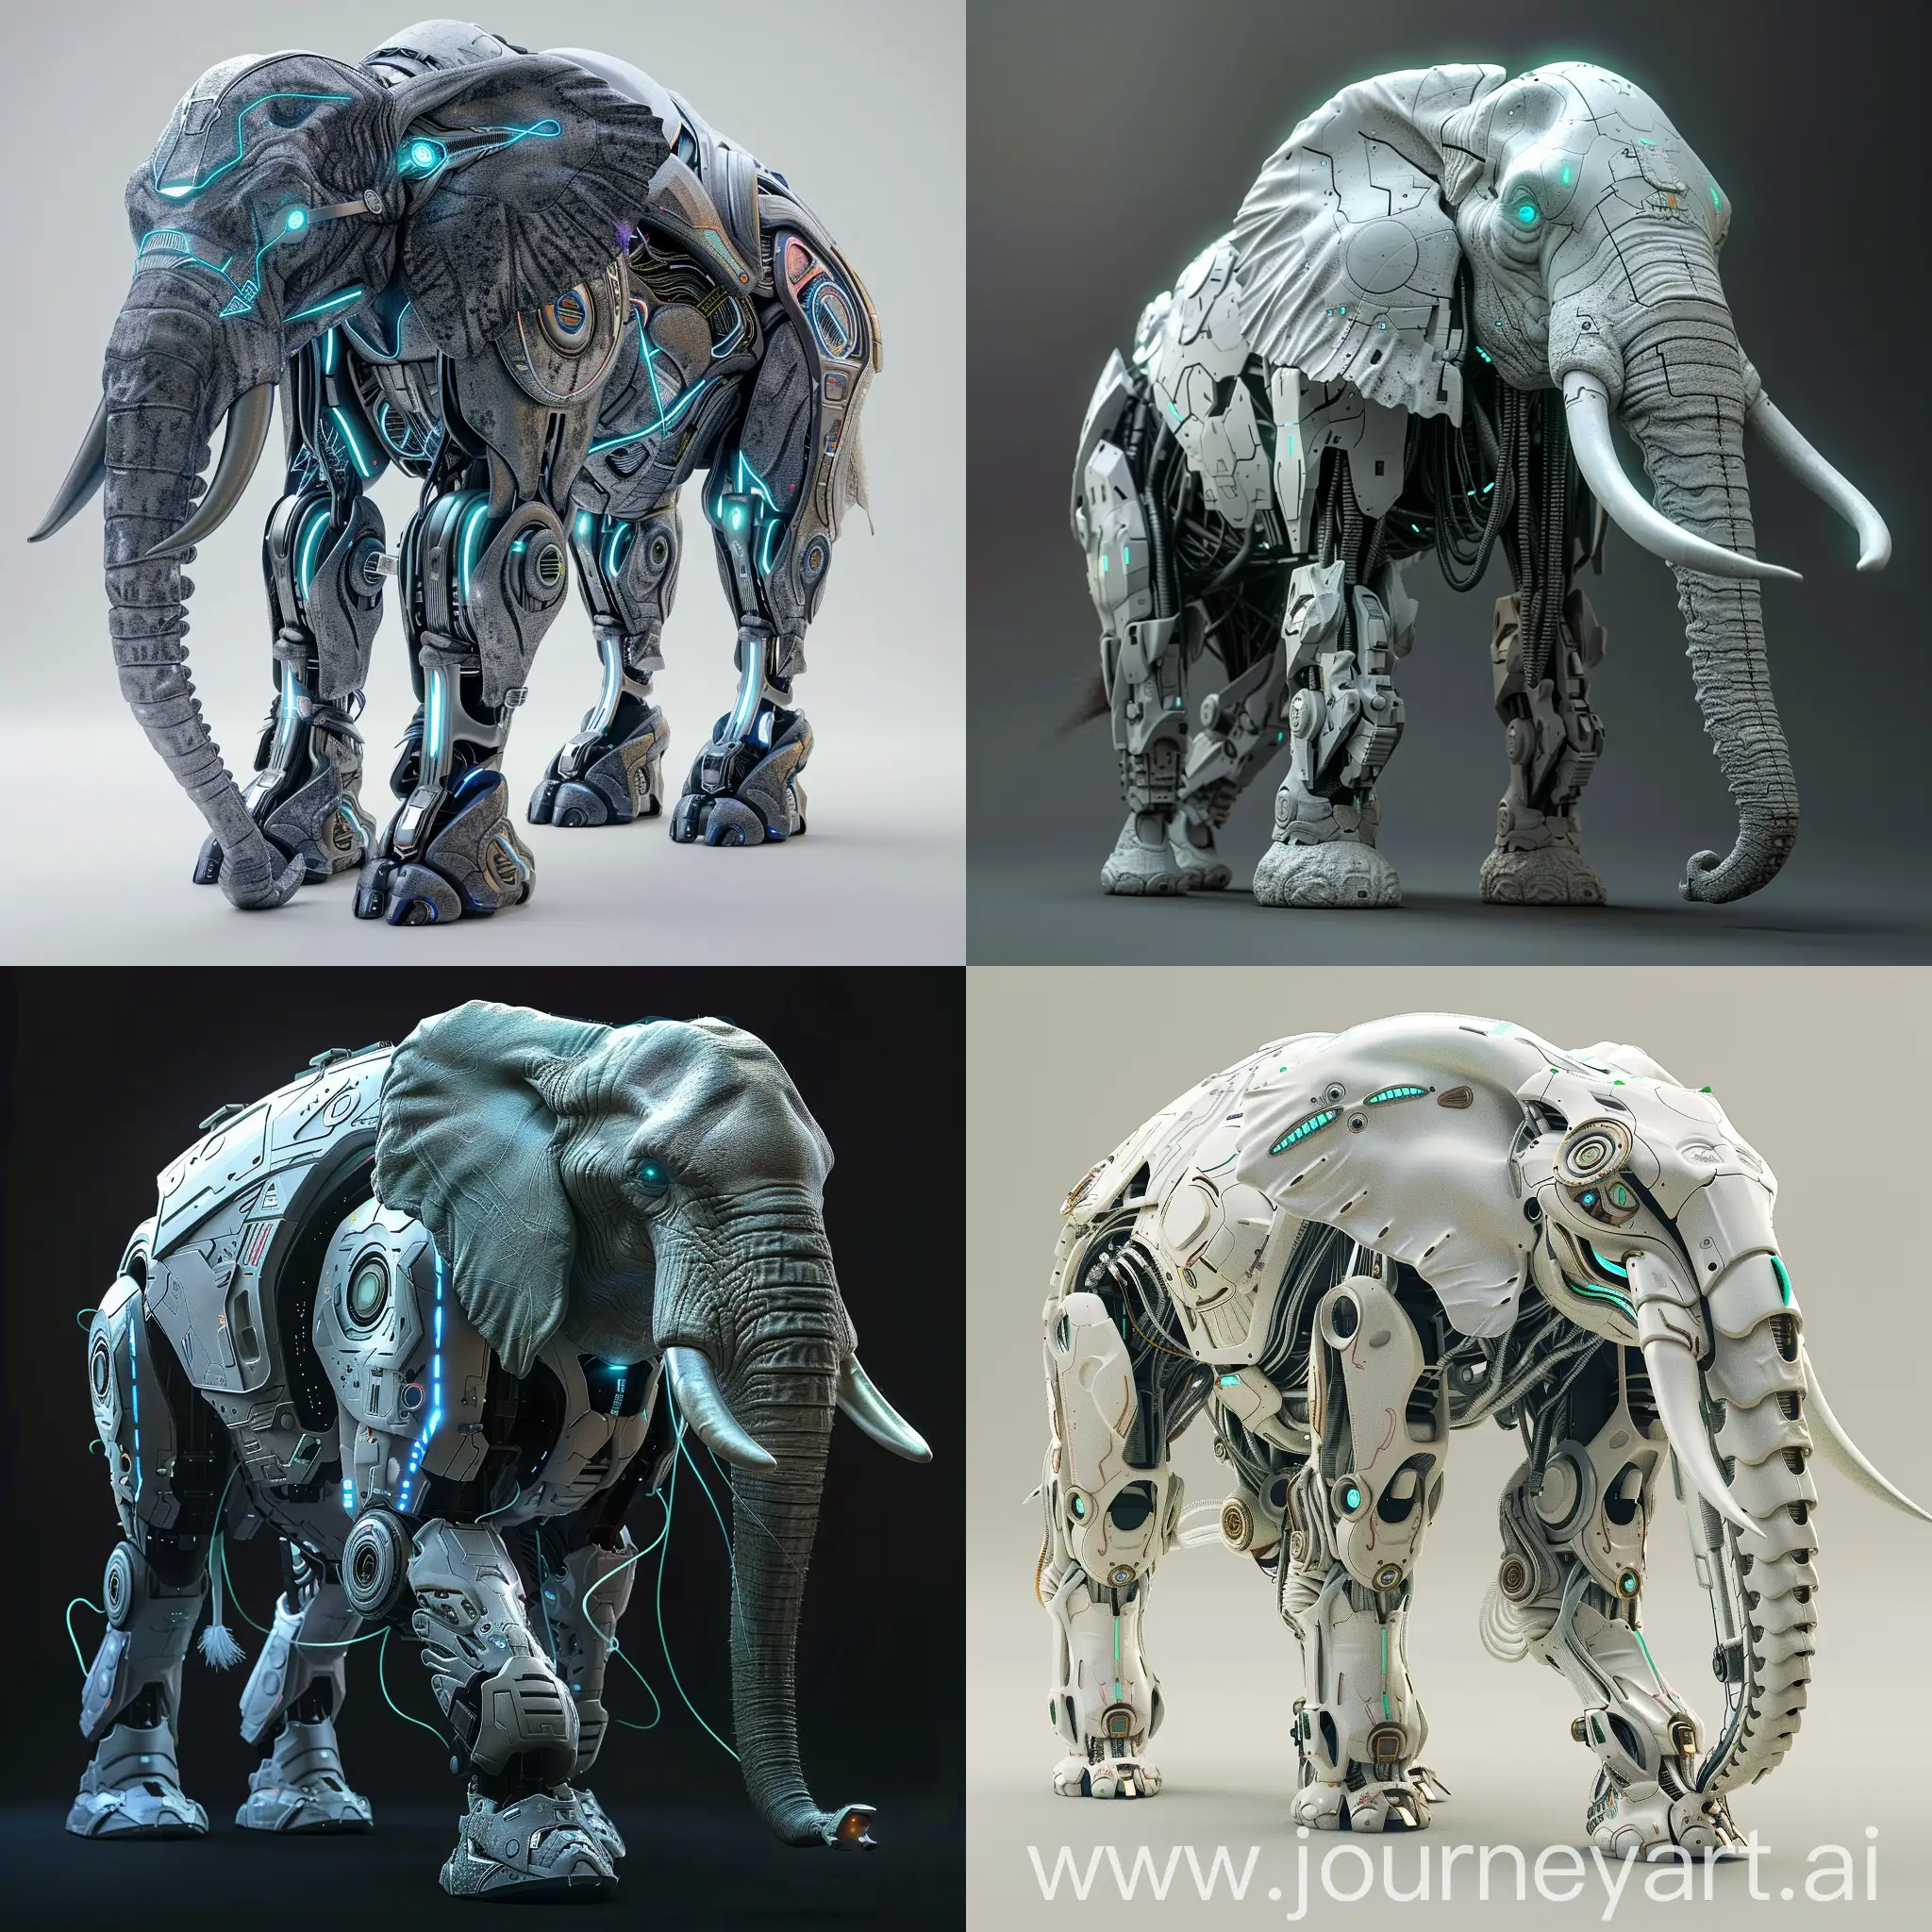 Futuristic elephant, Multi-layered Bionic Skin, Enhanced Muscular System, Neural Network Integration, Nano-Repair Systems, Internal Energy Core, Augmented Trunk, Advanced Digestive System, Advanced Cooling System, Trunk-mounted  Holographic  Display, Self-piloting  Capabilities, Symbiotic Bio-Organs, Brain-Computer Interface (BCI), Synthetic Telepathy, Genetic Engineering, Programmable Emotions, Augmented Reality Perception, Energy Harvesting from Environment, Self-replicating Nanobots, Modular Design, Hive Mind Integration, Aerodynamic Tusks, Multi-functional Trunk Tip, Illuminated Skin Panels, Retractable Ear Panels, Artificial Fur Markings, Kinetic Tail Fin, External Energy Reserve Packs, Magnetic Climbing Pads, Modular Trunk Attachments, Wheeled Undercarriage, Light-weave Skin, Symbiotic Exoskeleton, Neural Interface Tendrils, Organic-Tech Trunk, Adaptive Camouflage Skin, Modular Trunk Segments, Projected Reality Interface, Bio-luminescent Communication Displays, Energy Harvesting Panels, Subdermal Data Ports, unreal engine 5 --stylize 1000